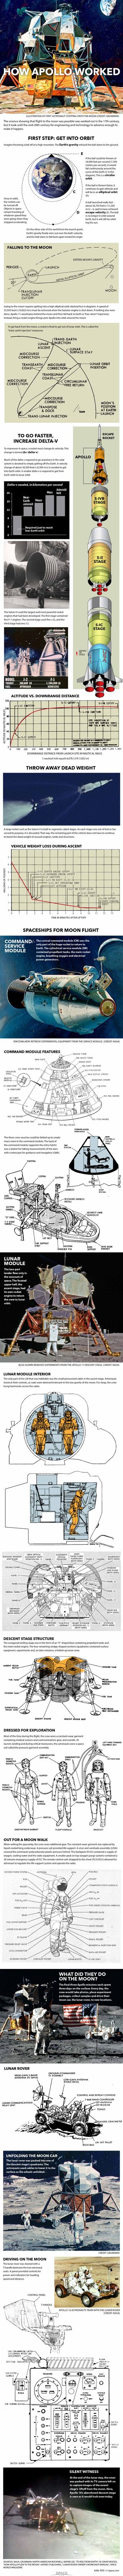 NASA's Apollo moon landings were audacious feats of engineering. See how the amazing Apollo moon landings worked in this Space.com infographic.